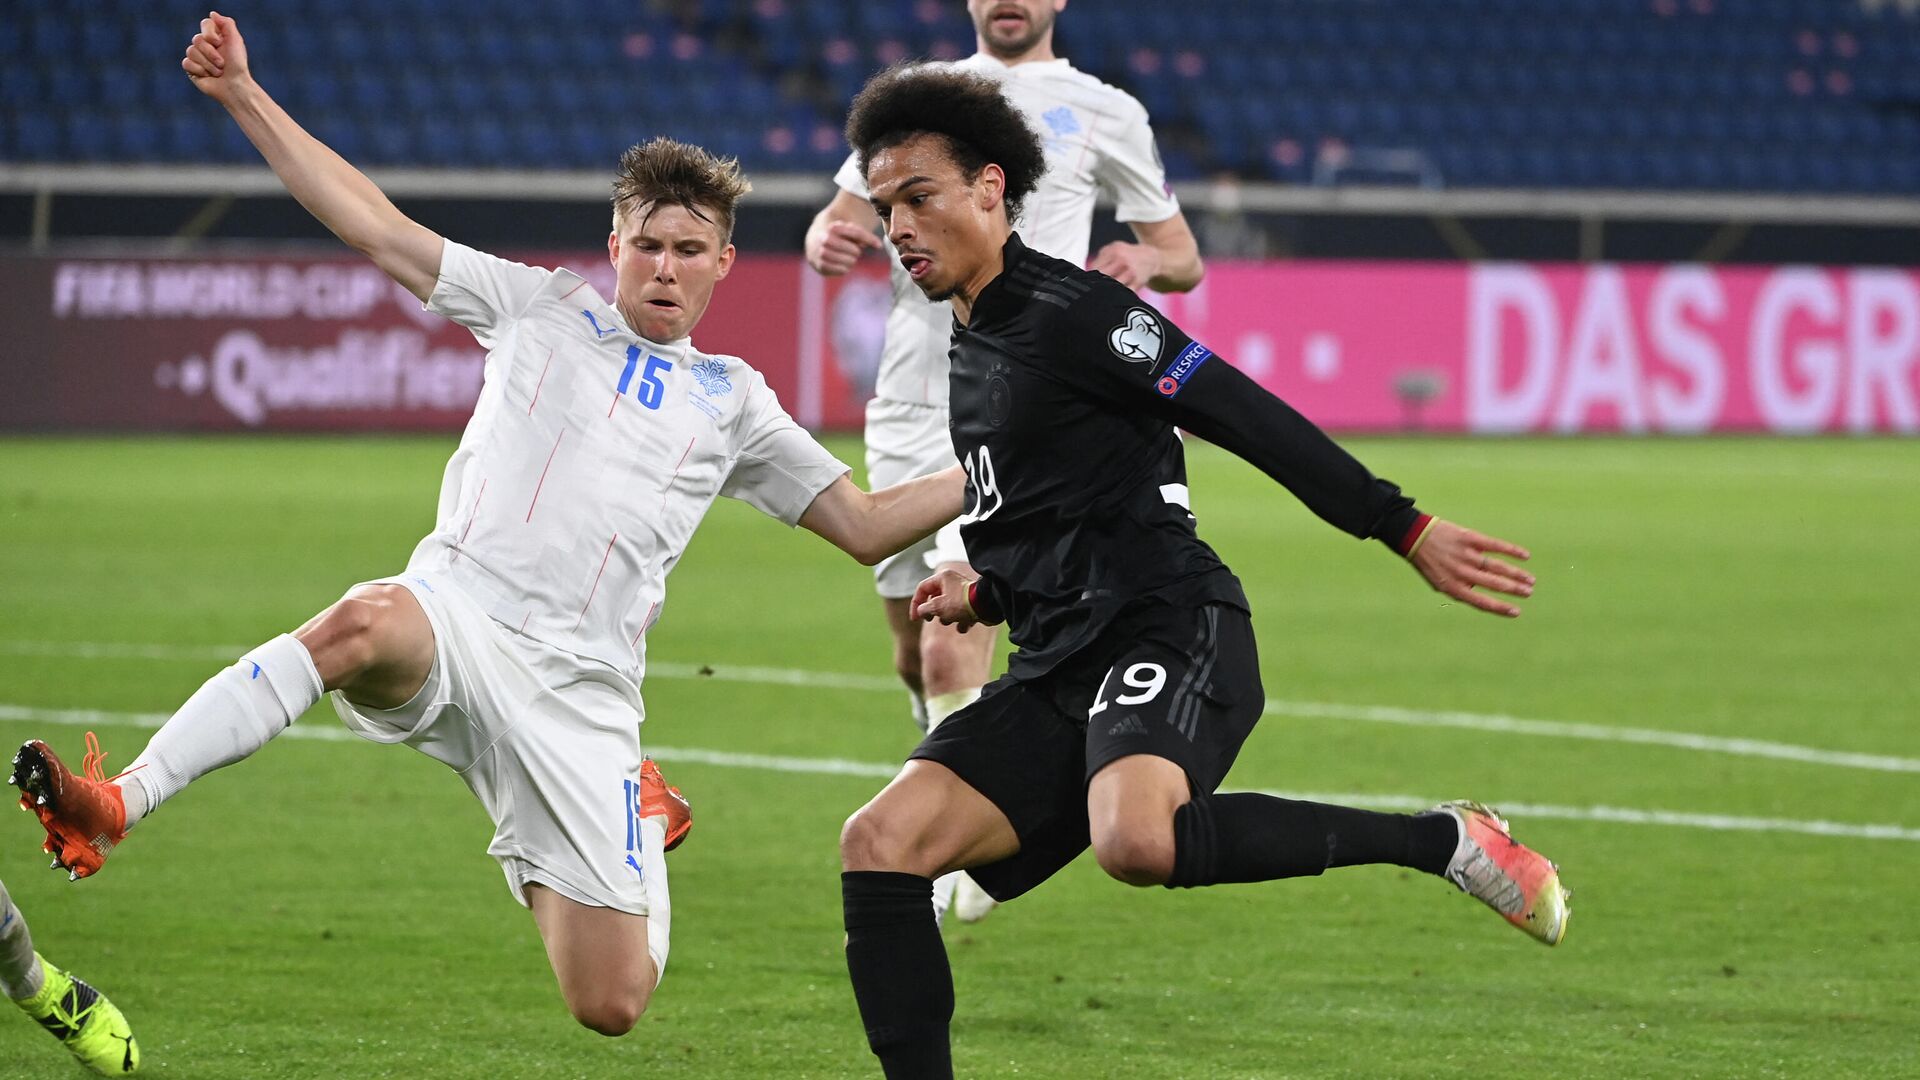 Iceland's defender Alfons Sampsted and Germany's midfielder Leroy Sane (R) vie for the ball during the FIFA World Cup Qatar 2022 qualification football match Germany v Iceland in Duisburg, western Germany on March 25, 2021. (Photo by Ina Fassbender / AFP) - РИА Новости, 1920, 26.03.2021